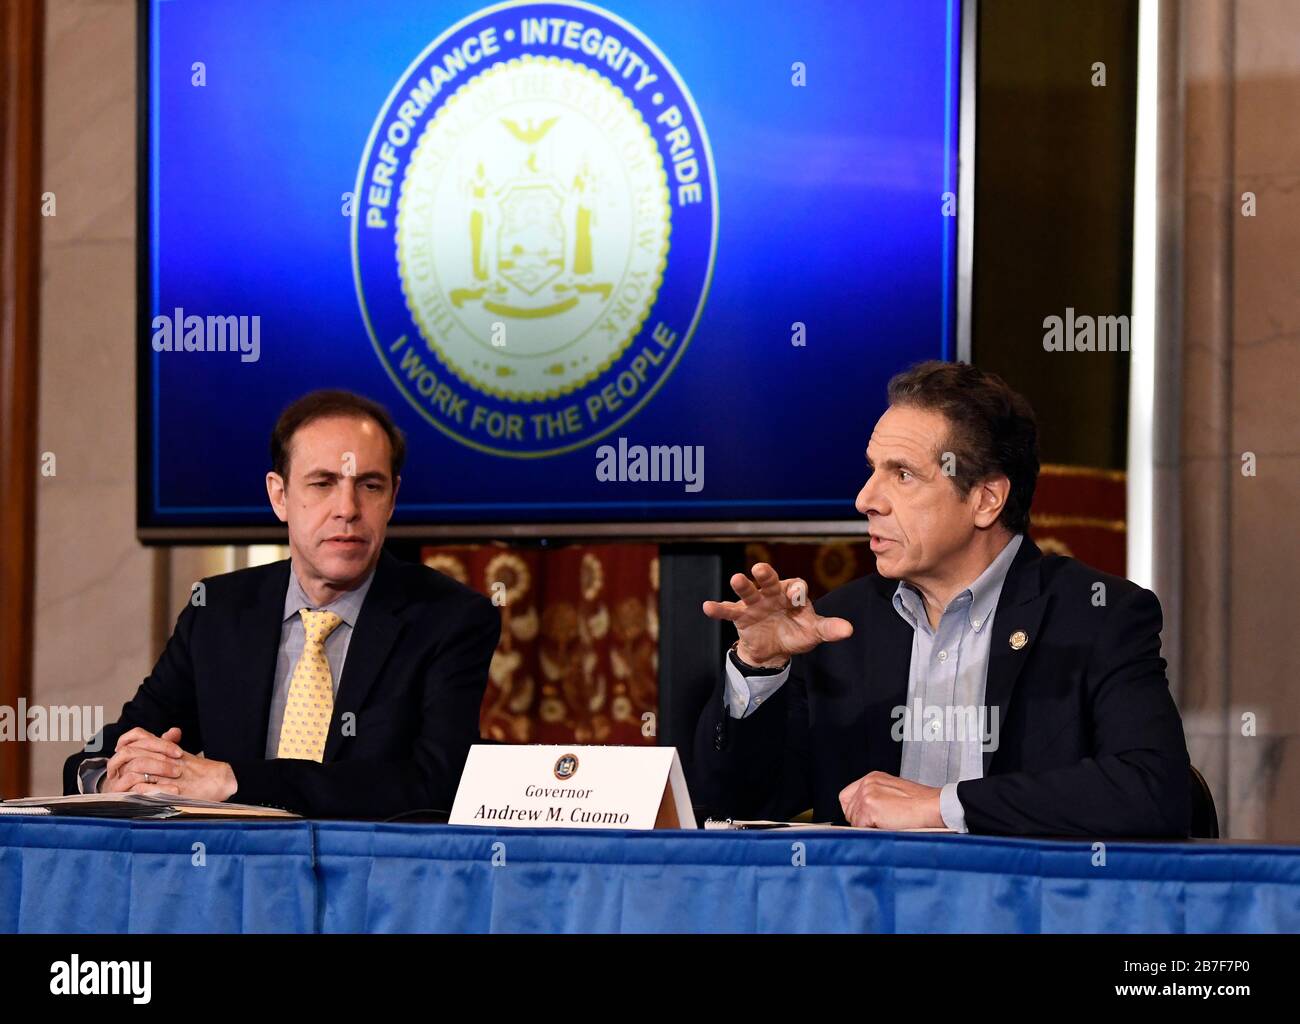 Albany,New York / United States 3/16/20 New York Gov. Andrew Cuomo gives an update on the Coronavirus during a news conference at the state Capitol. Stock Photo